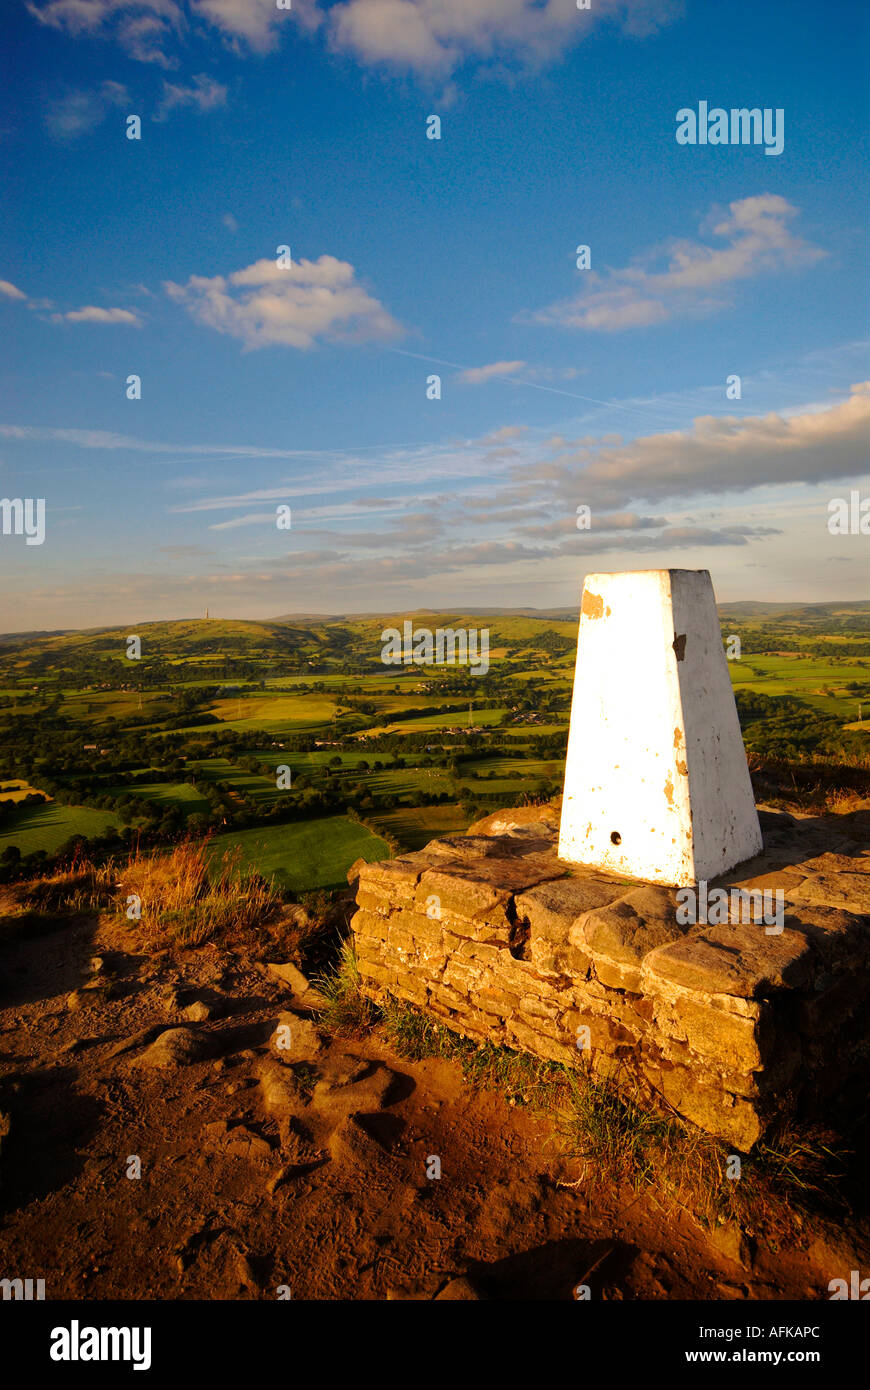 The Trig Point at Cloudside Looking Out Towards Croker Hill Nr Congleton Cheshire UK Stock Photo